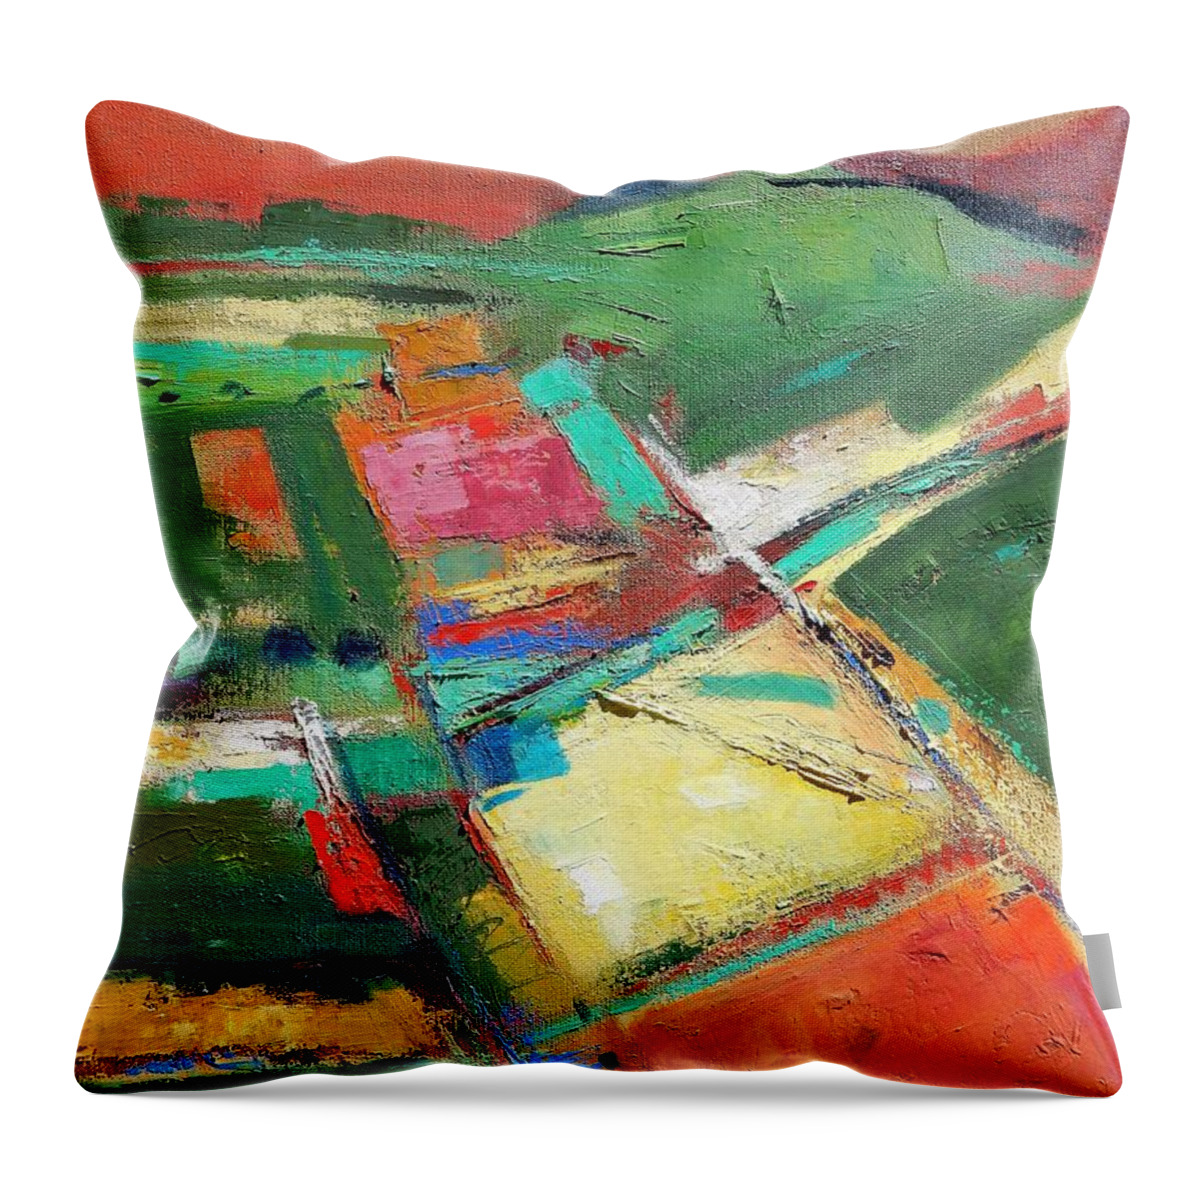 Landscape Throw Pillow featuring the painting Land Patches by Gary Coleman